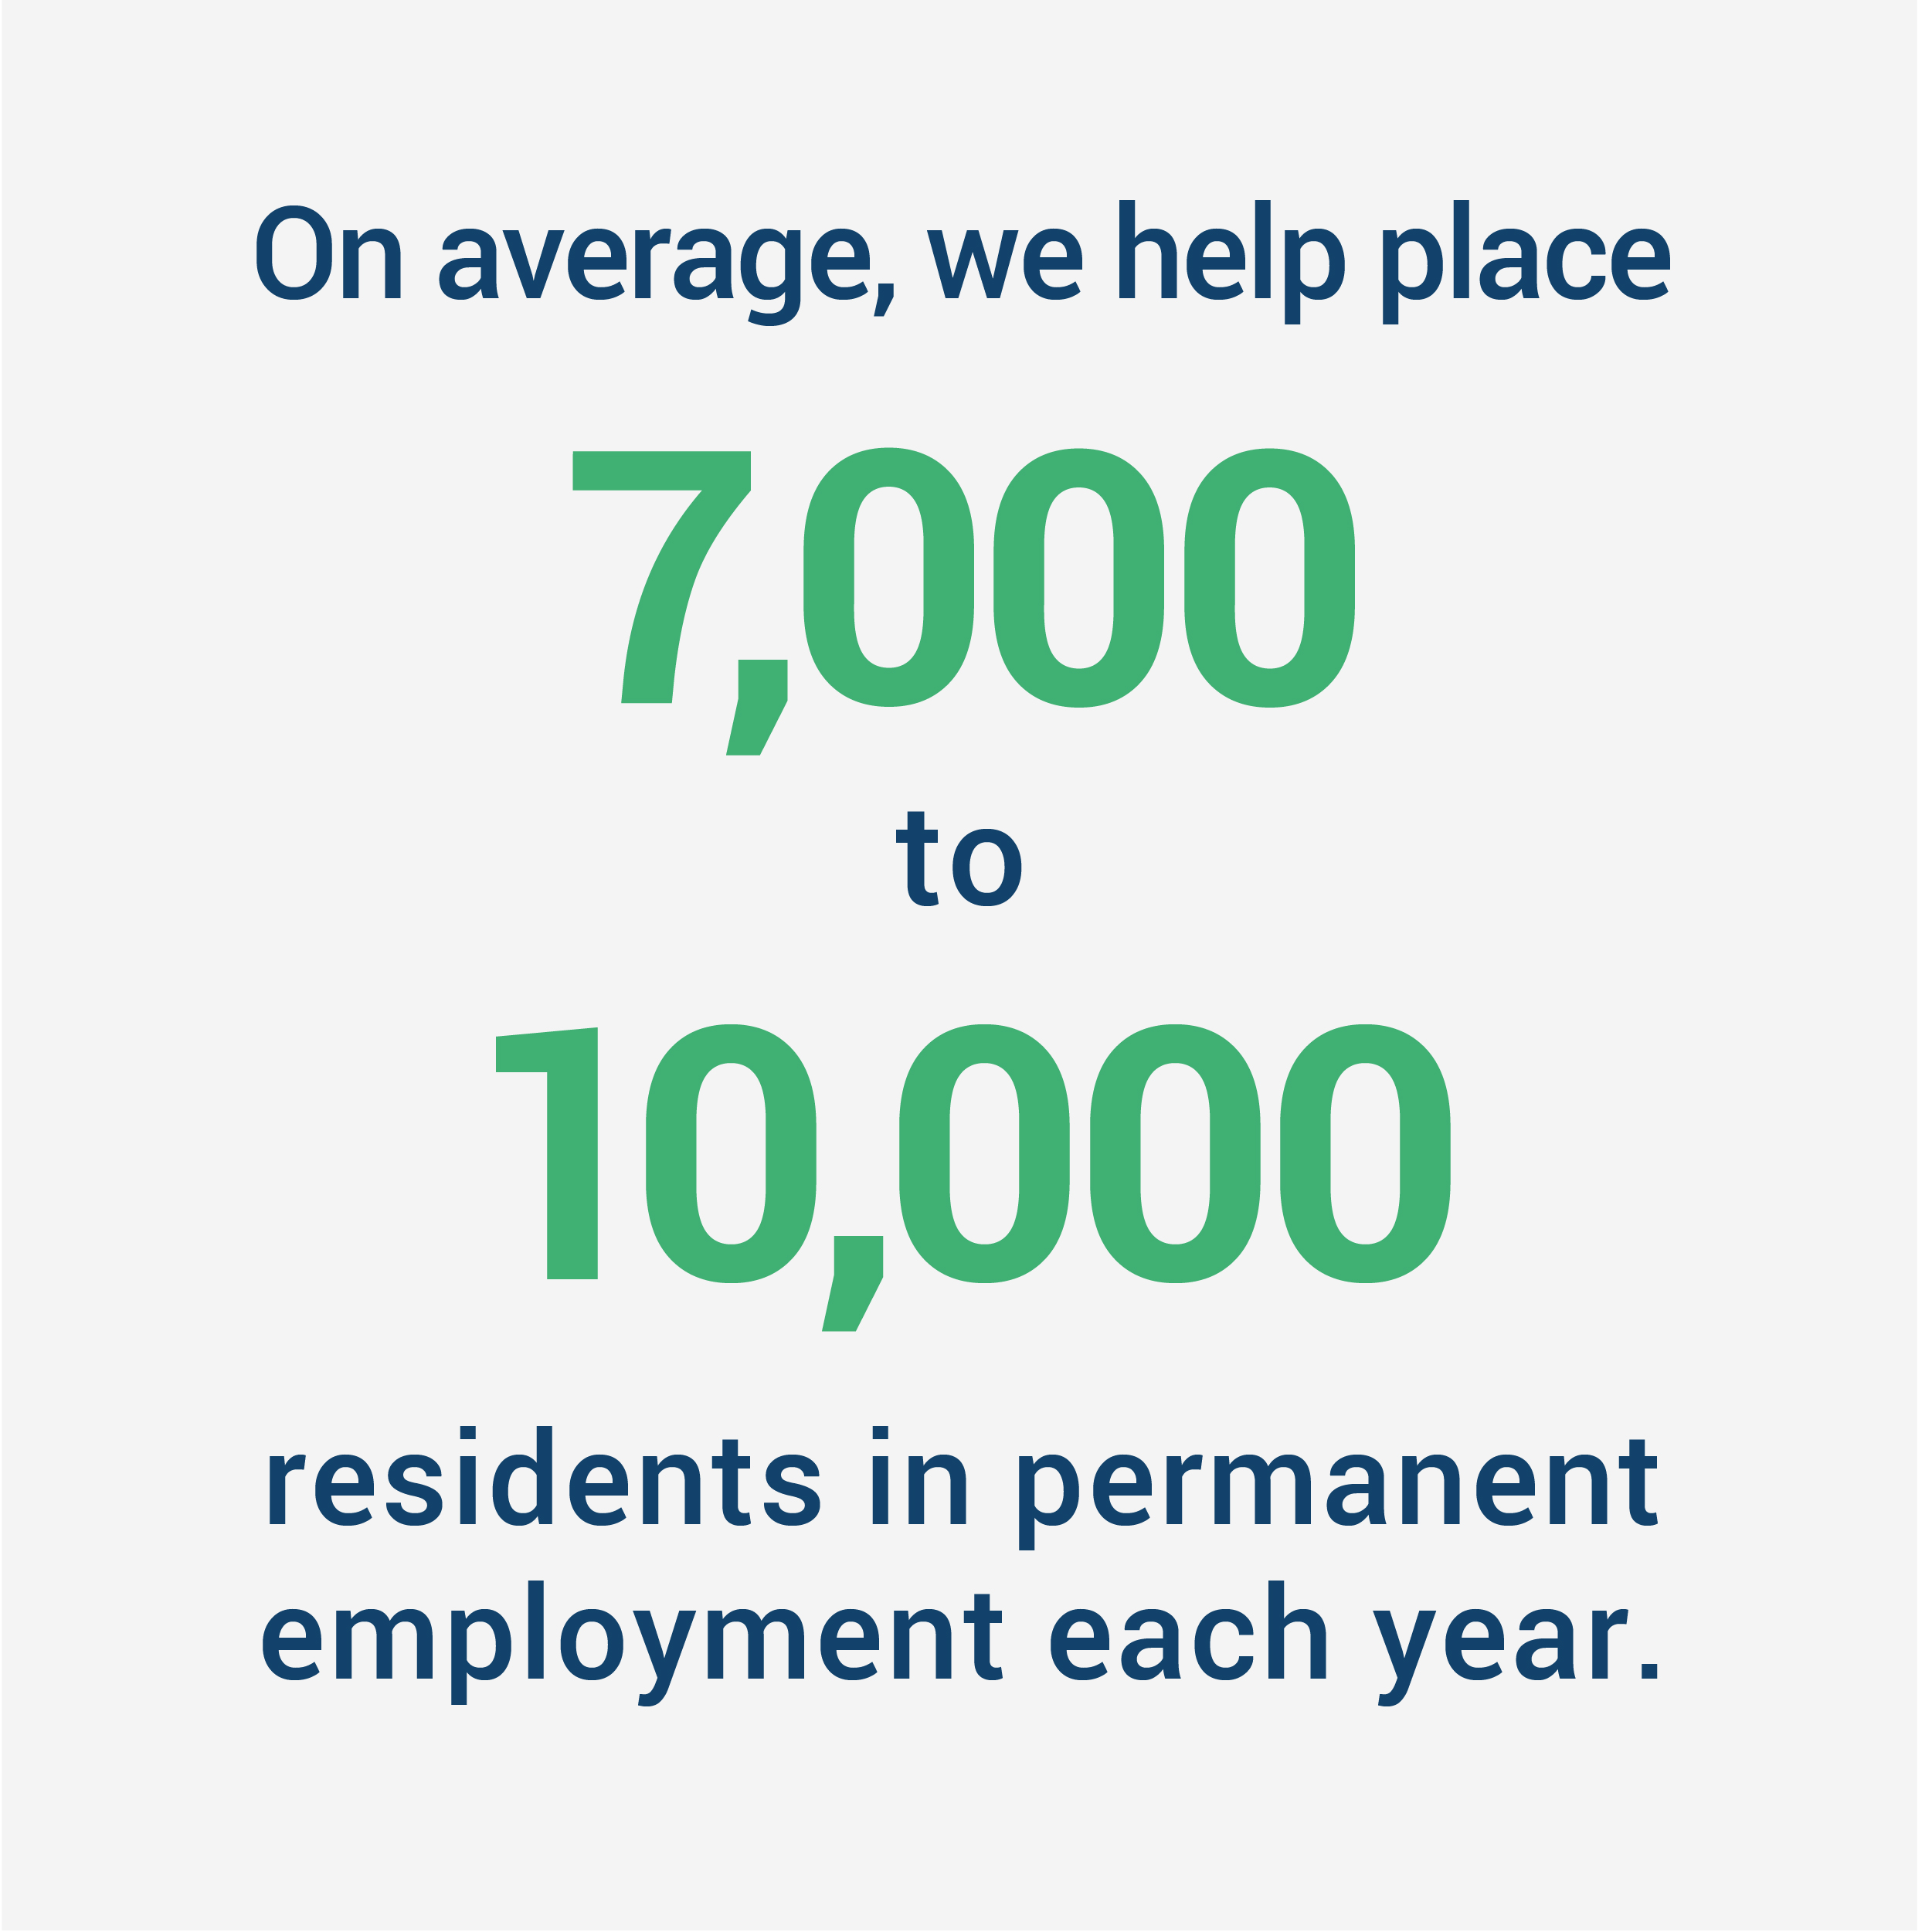  help place 7,000 - 10,000 residents in permanent employment